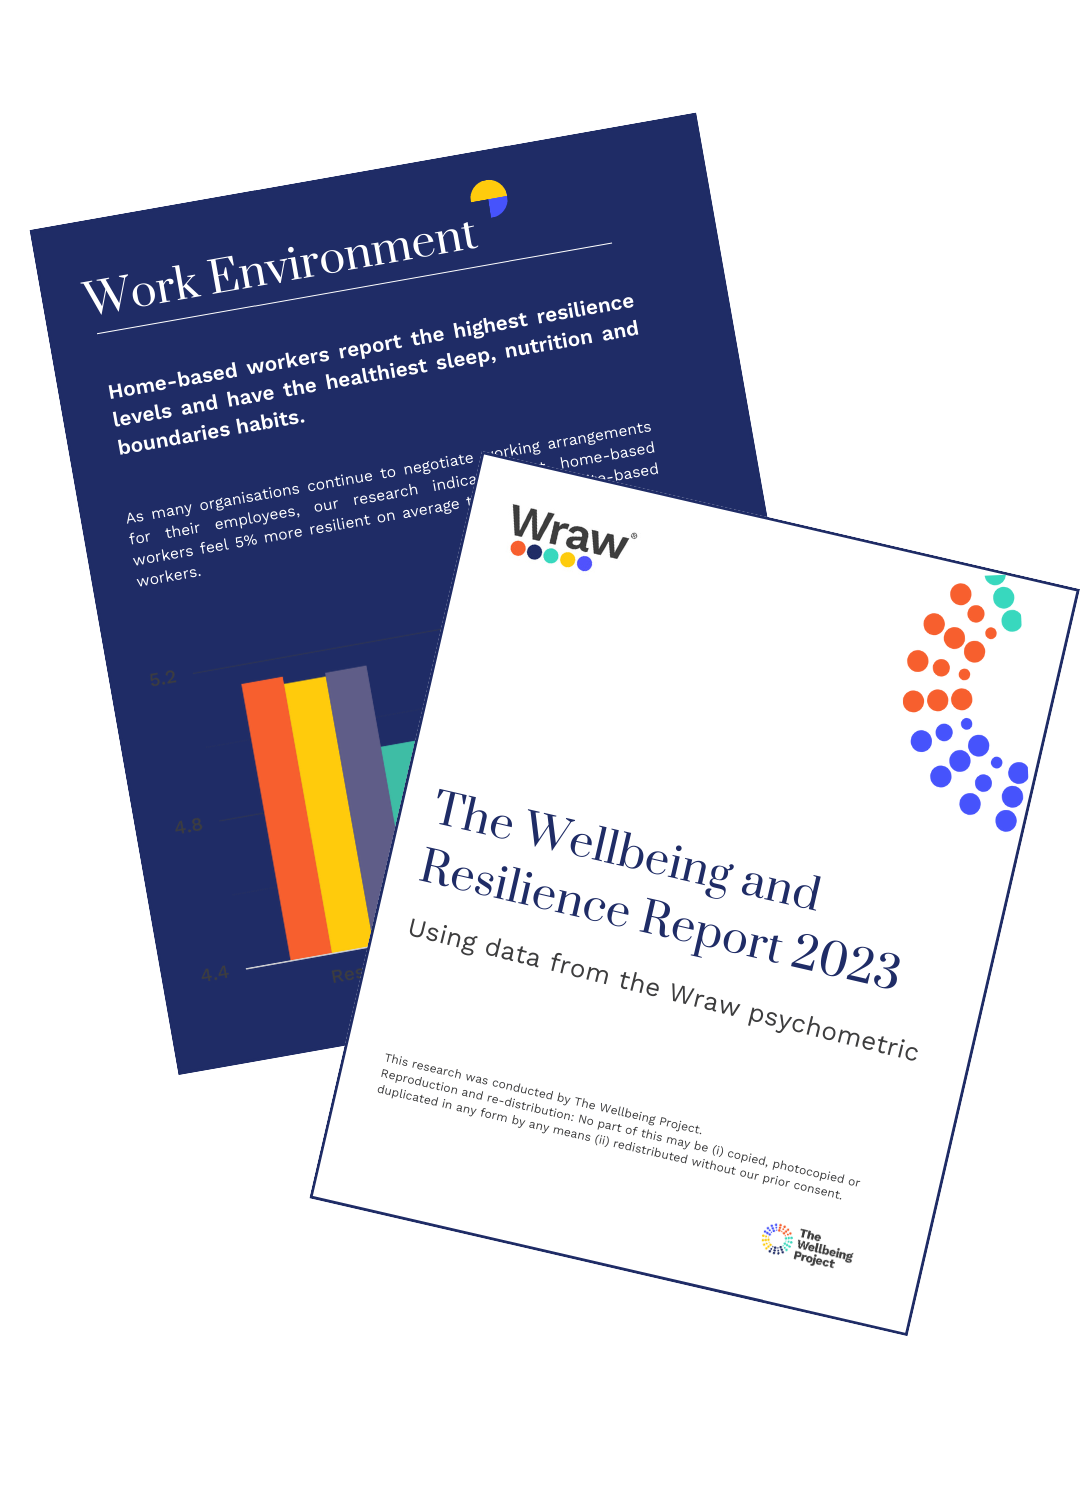 Screenshots of the Wellbeing and Resilience Report 2023 